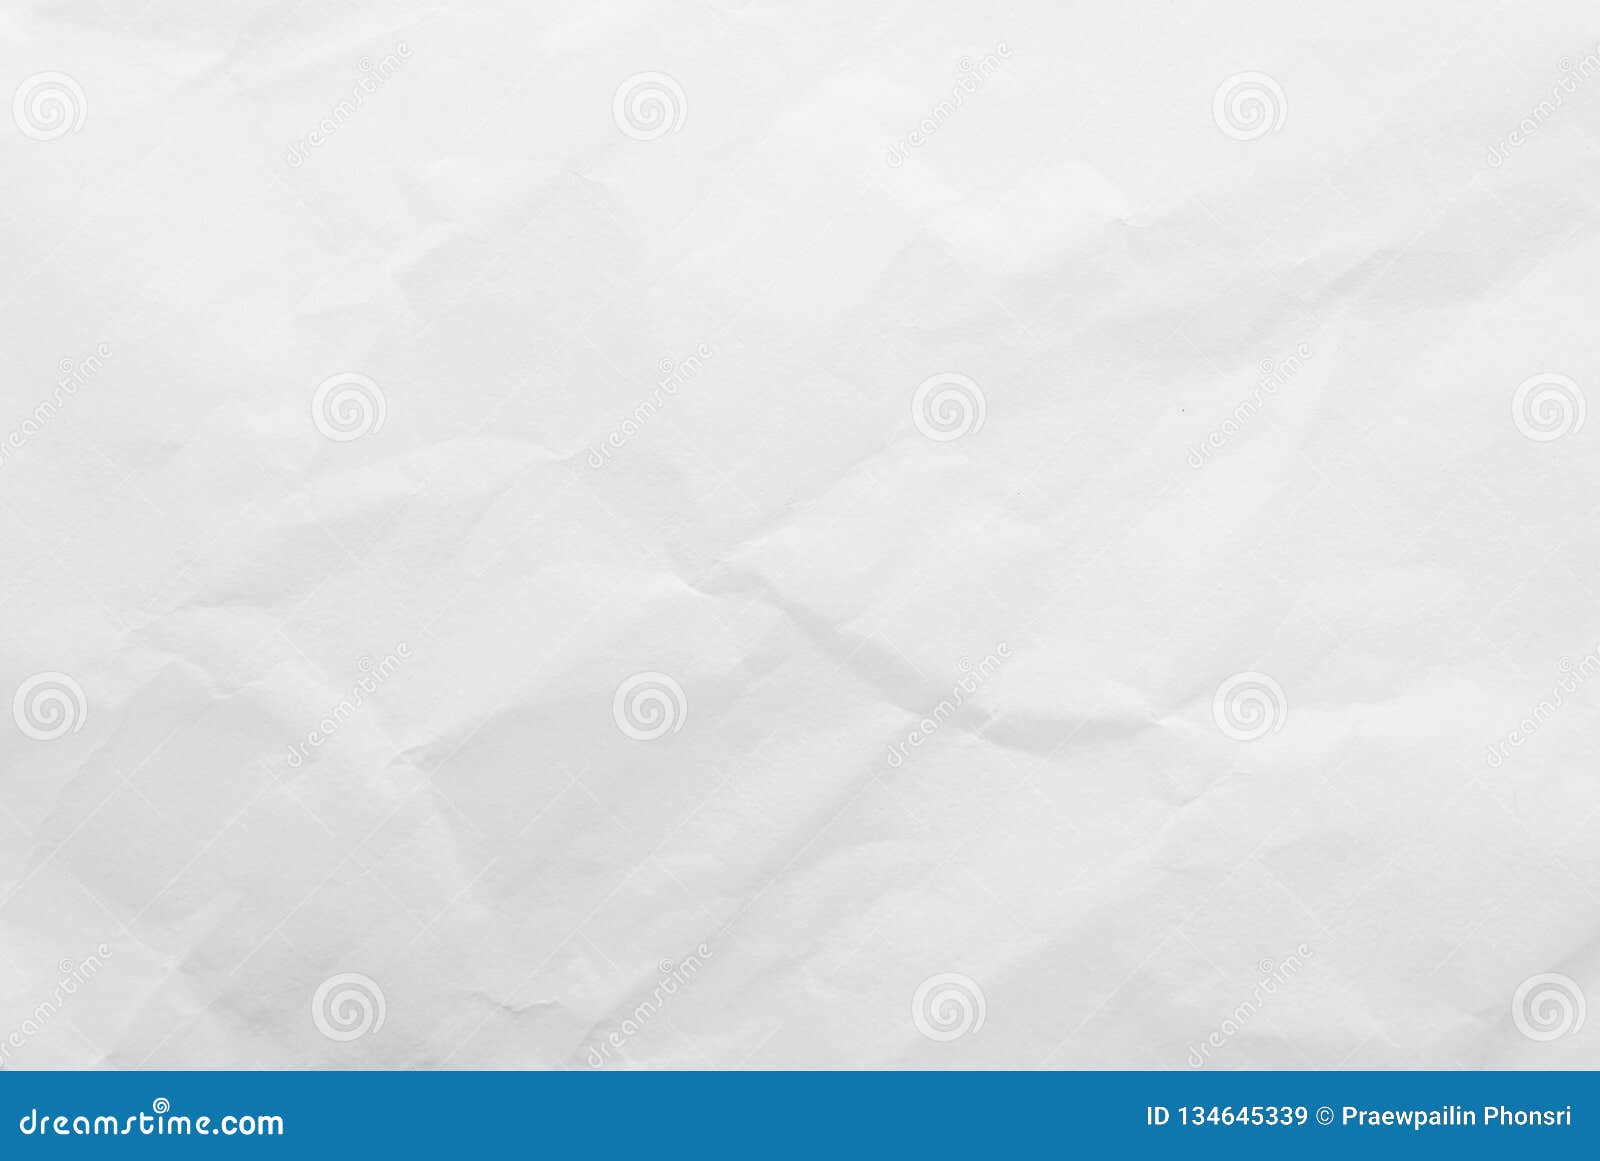 white crumpled paper texture background. close-up